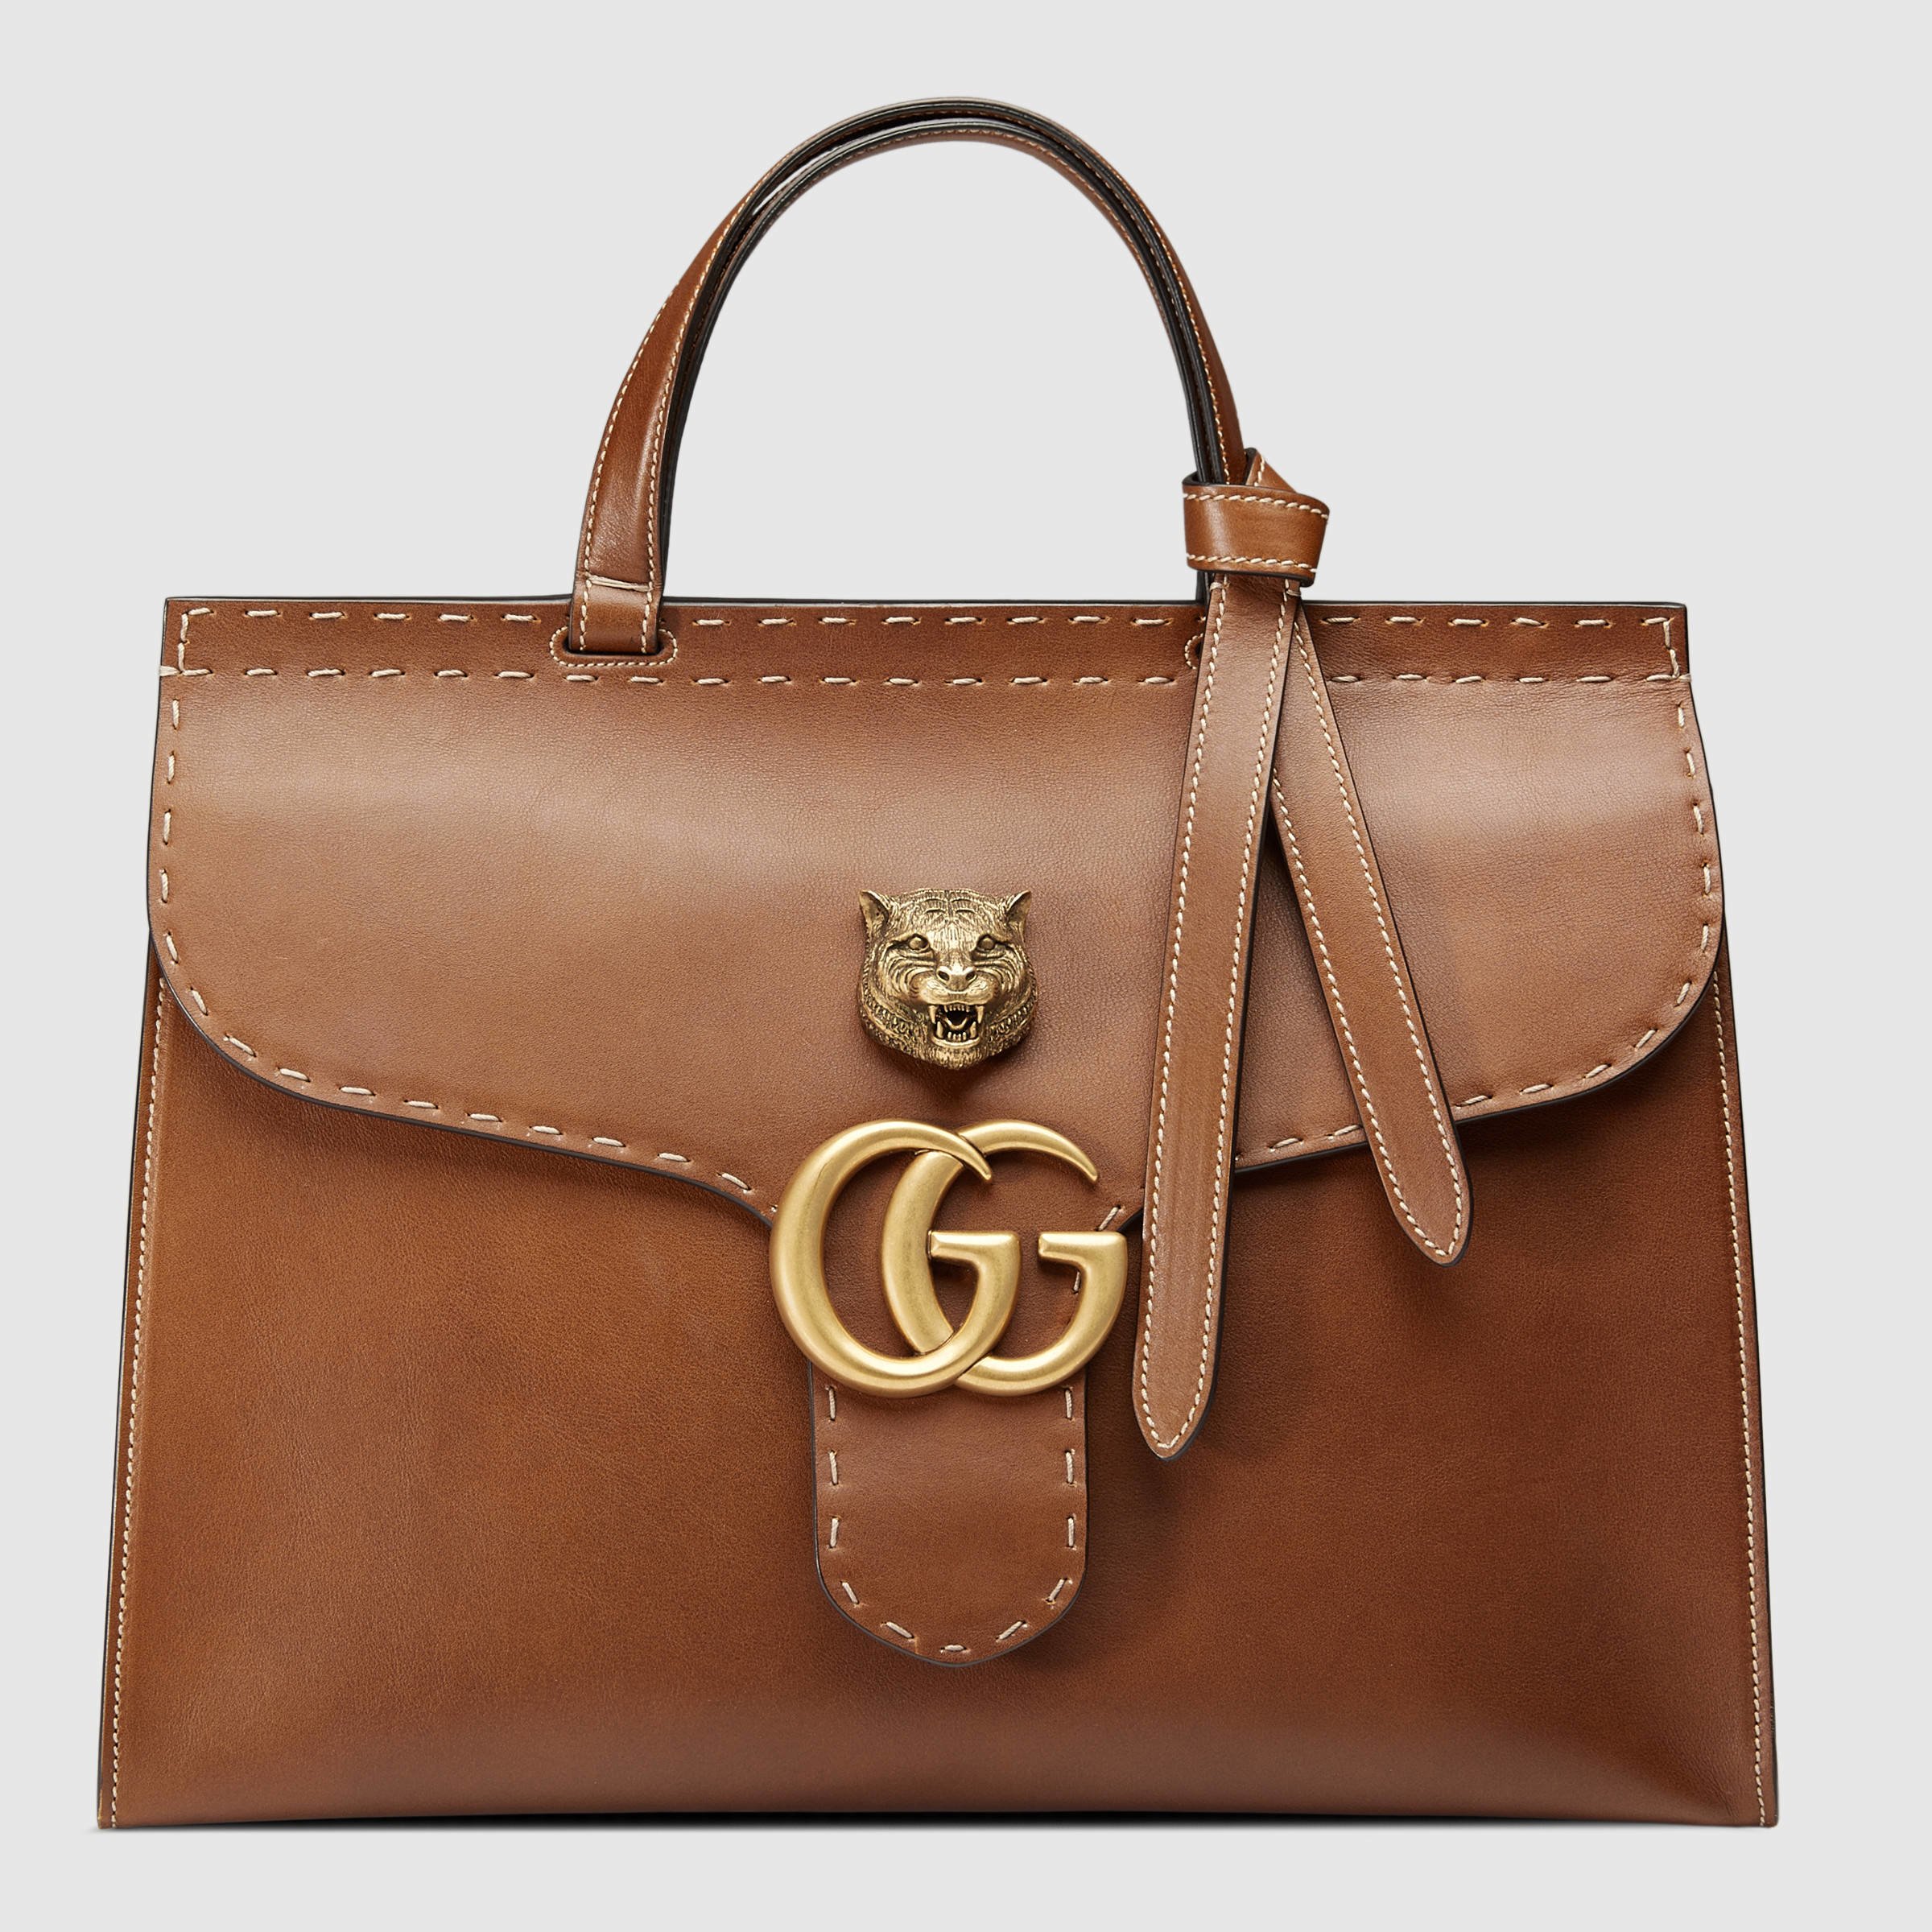 Gucci Gg Marmont Leather Top Handle Bag in Brown Leather (Brown) - Lyst